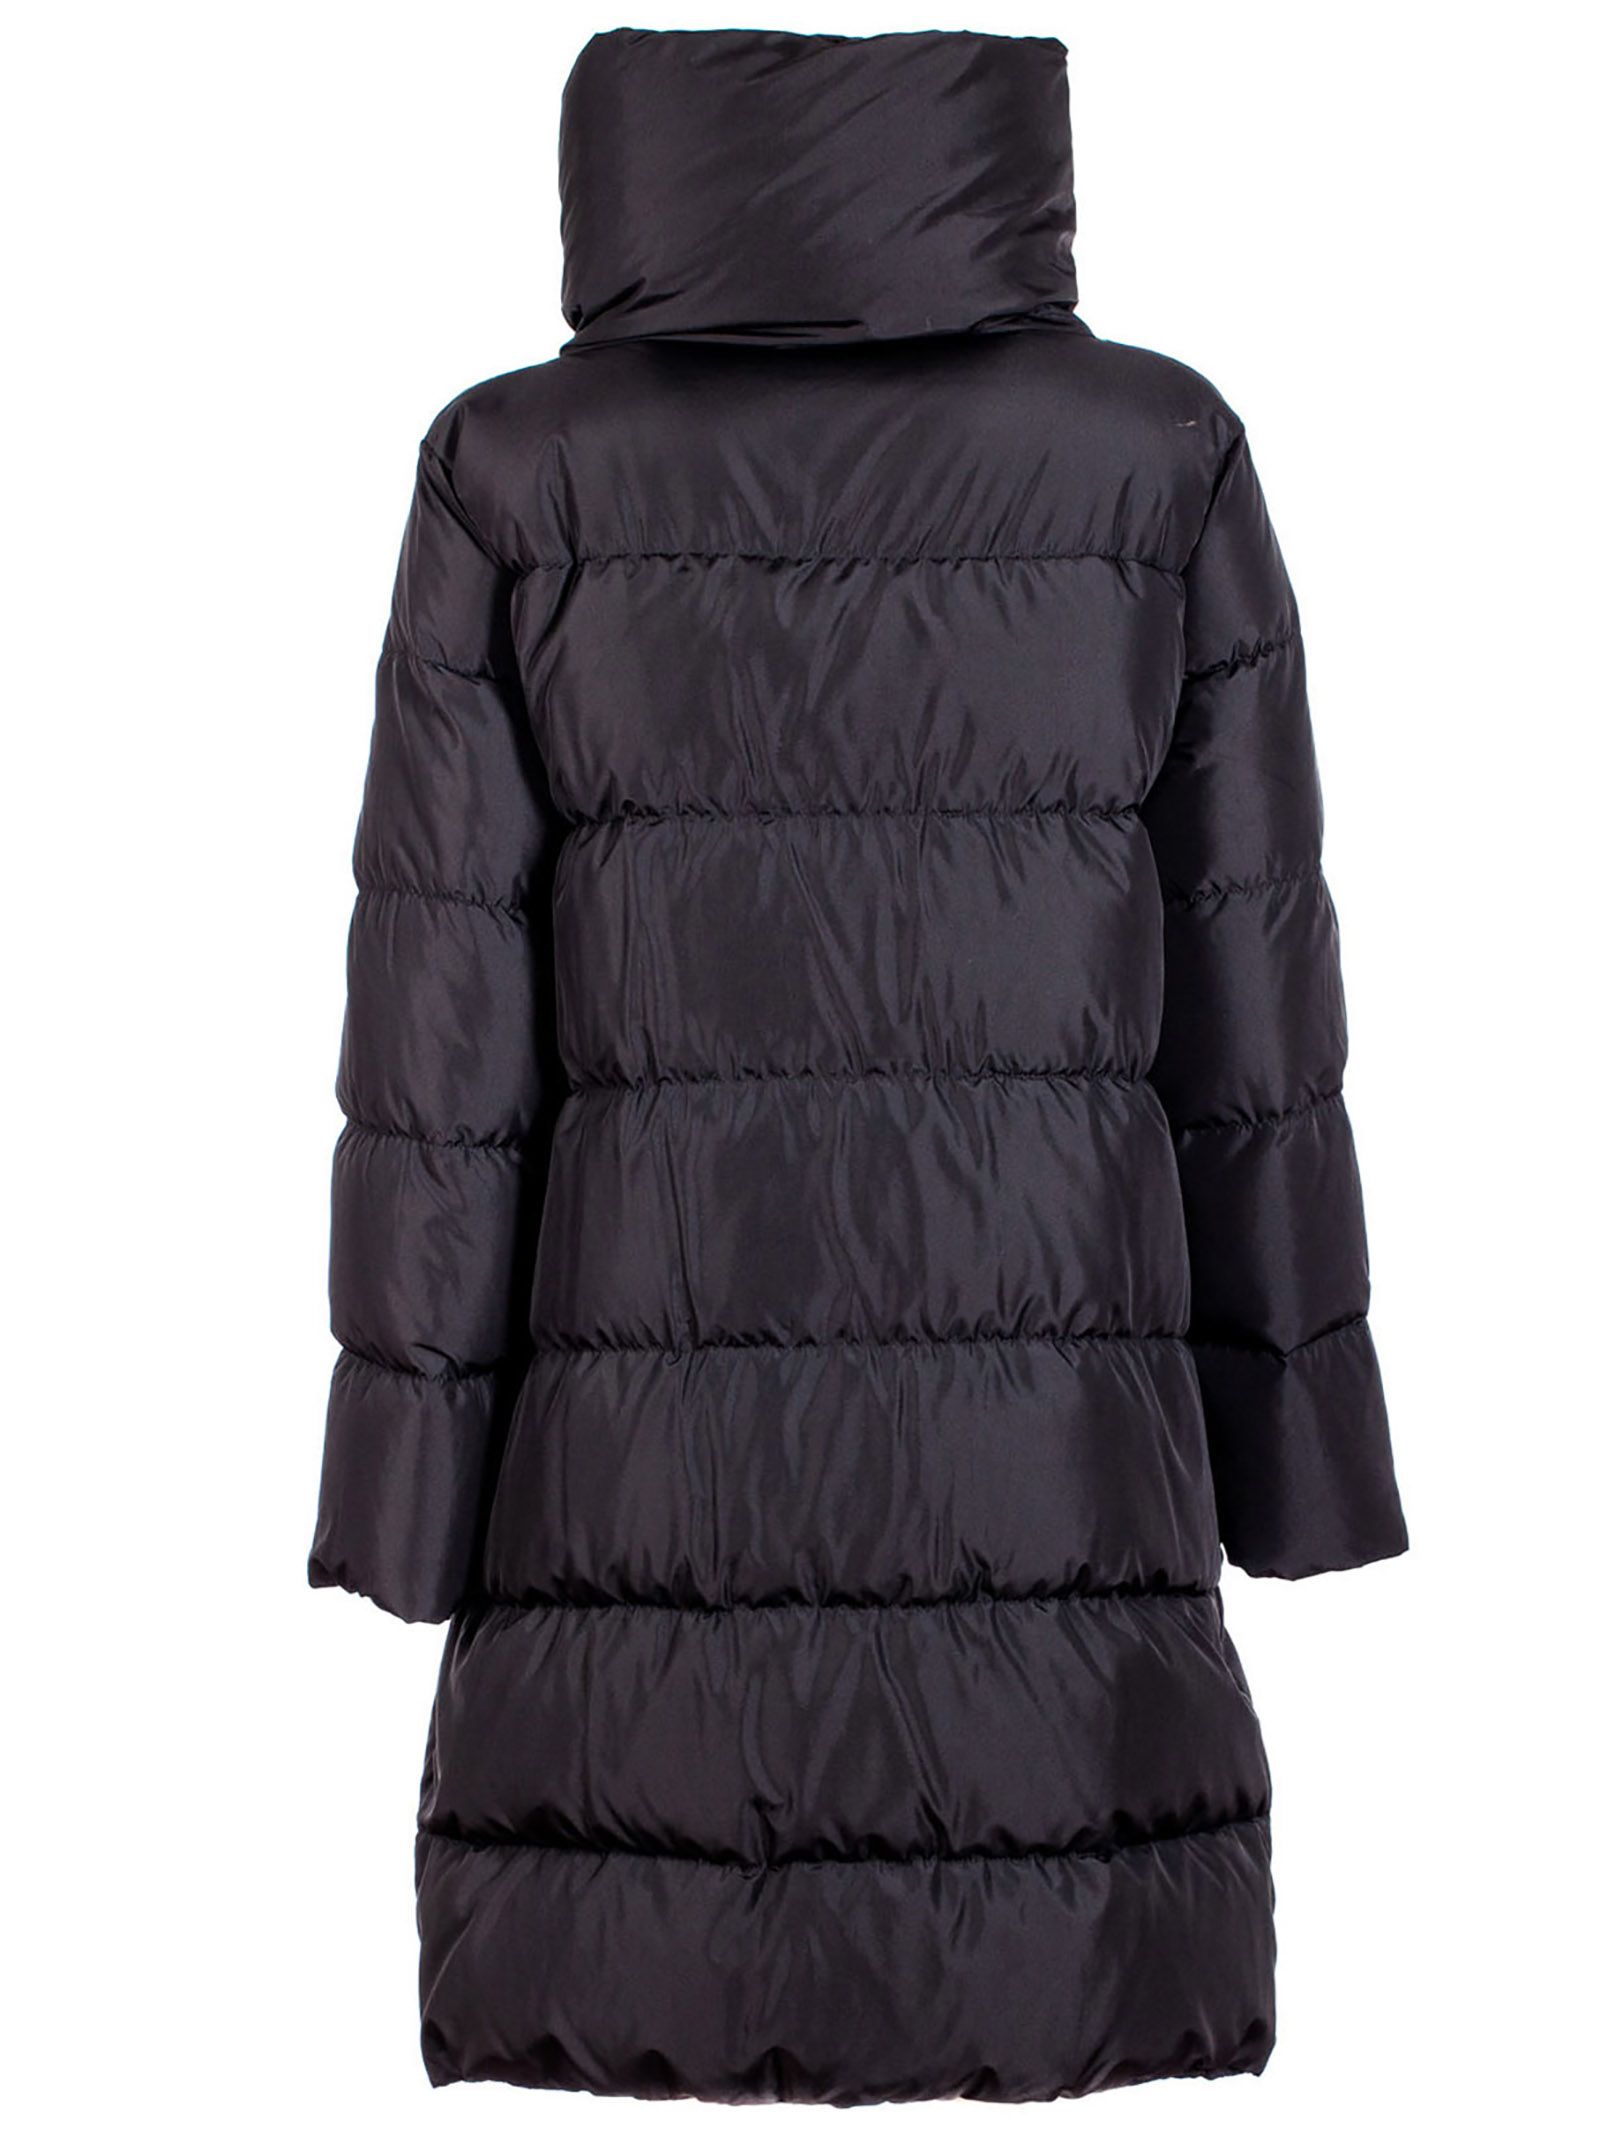 italist | Best price in the market for Bacon Clothing Bacon Big Puffa Down Jacket - Black 